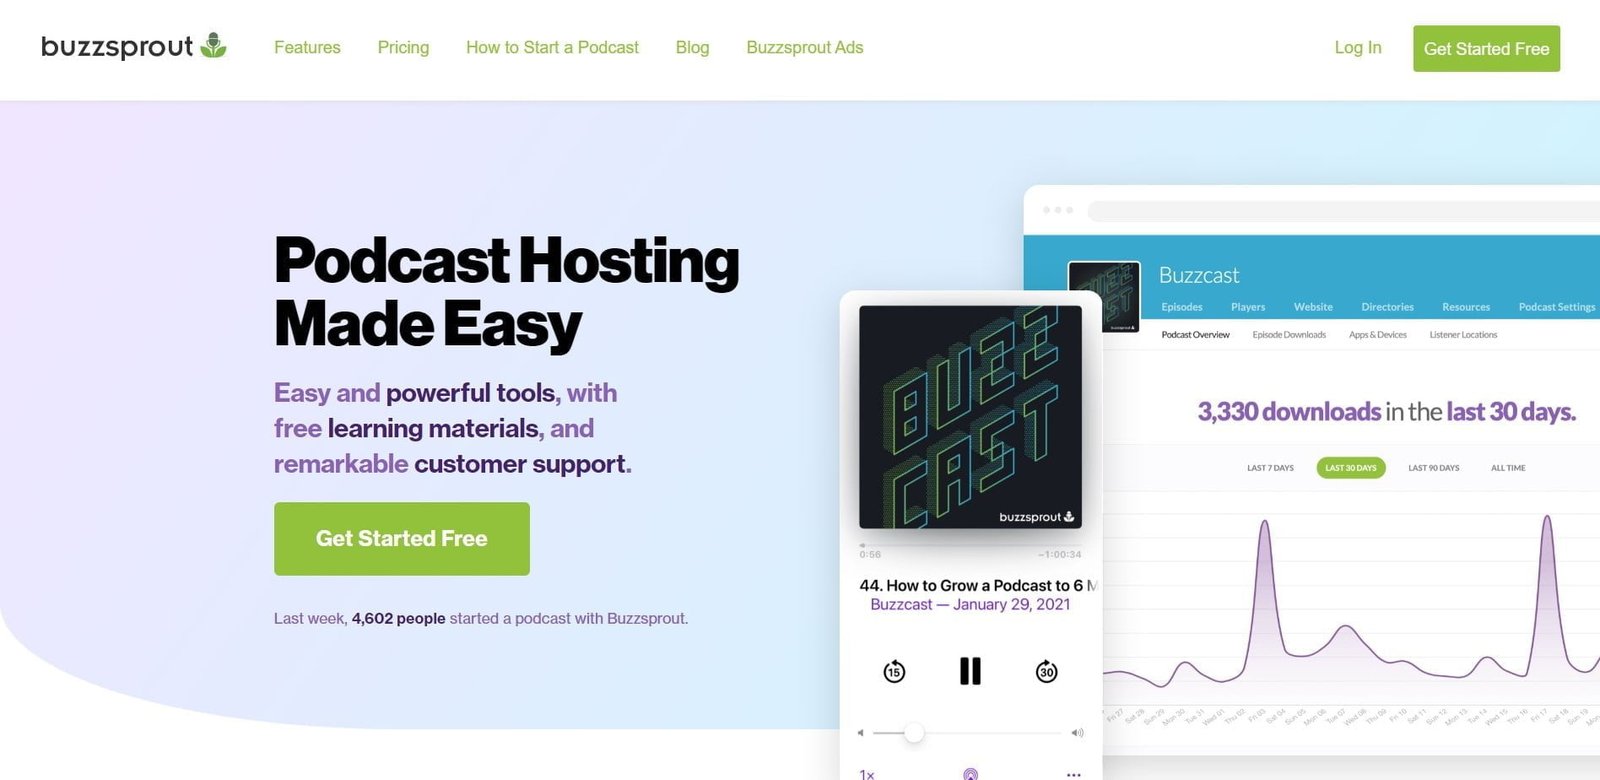 Buzzsprout is a podcast hosting platform for creators to manage and distribute their podcasts.